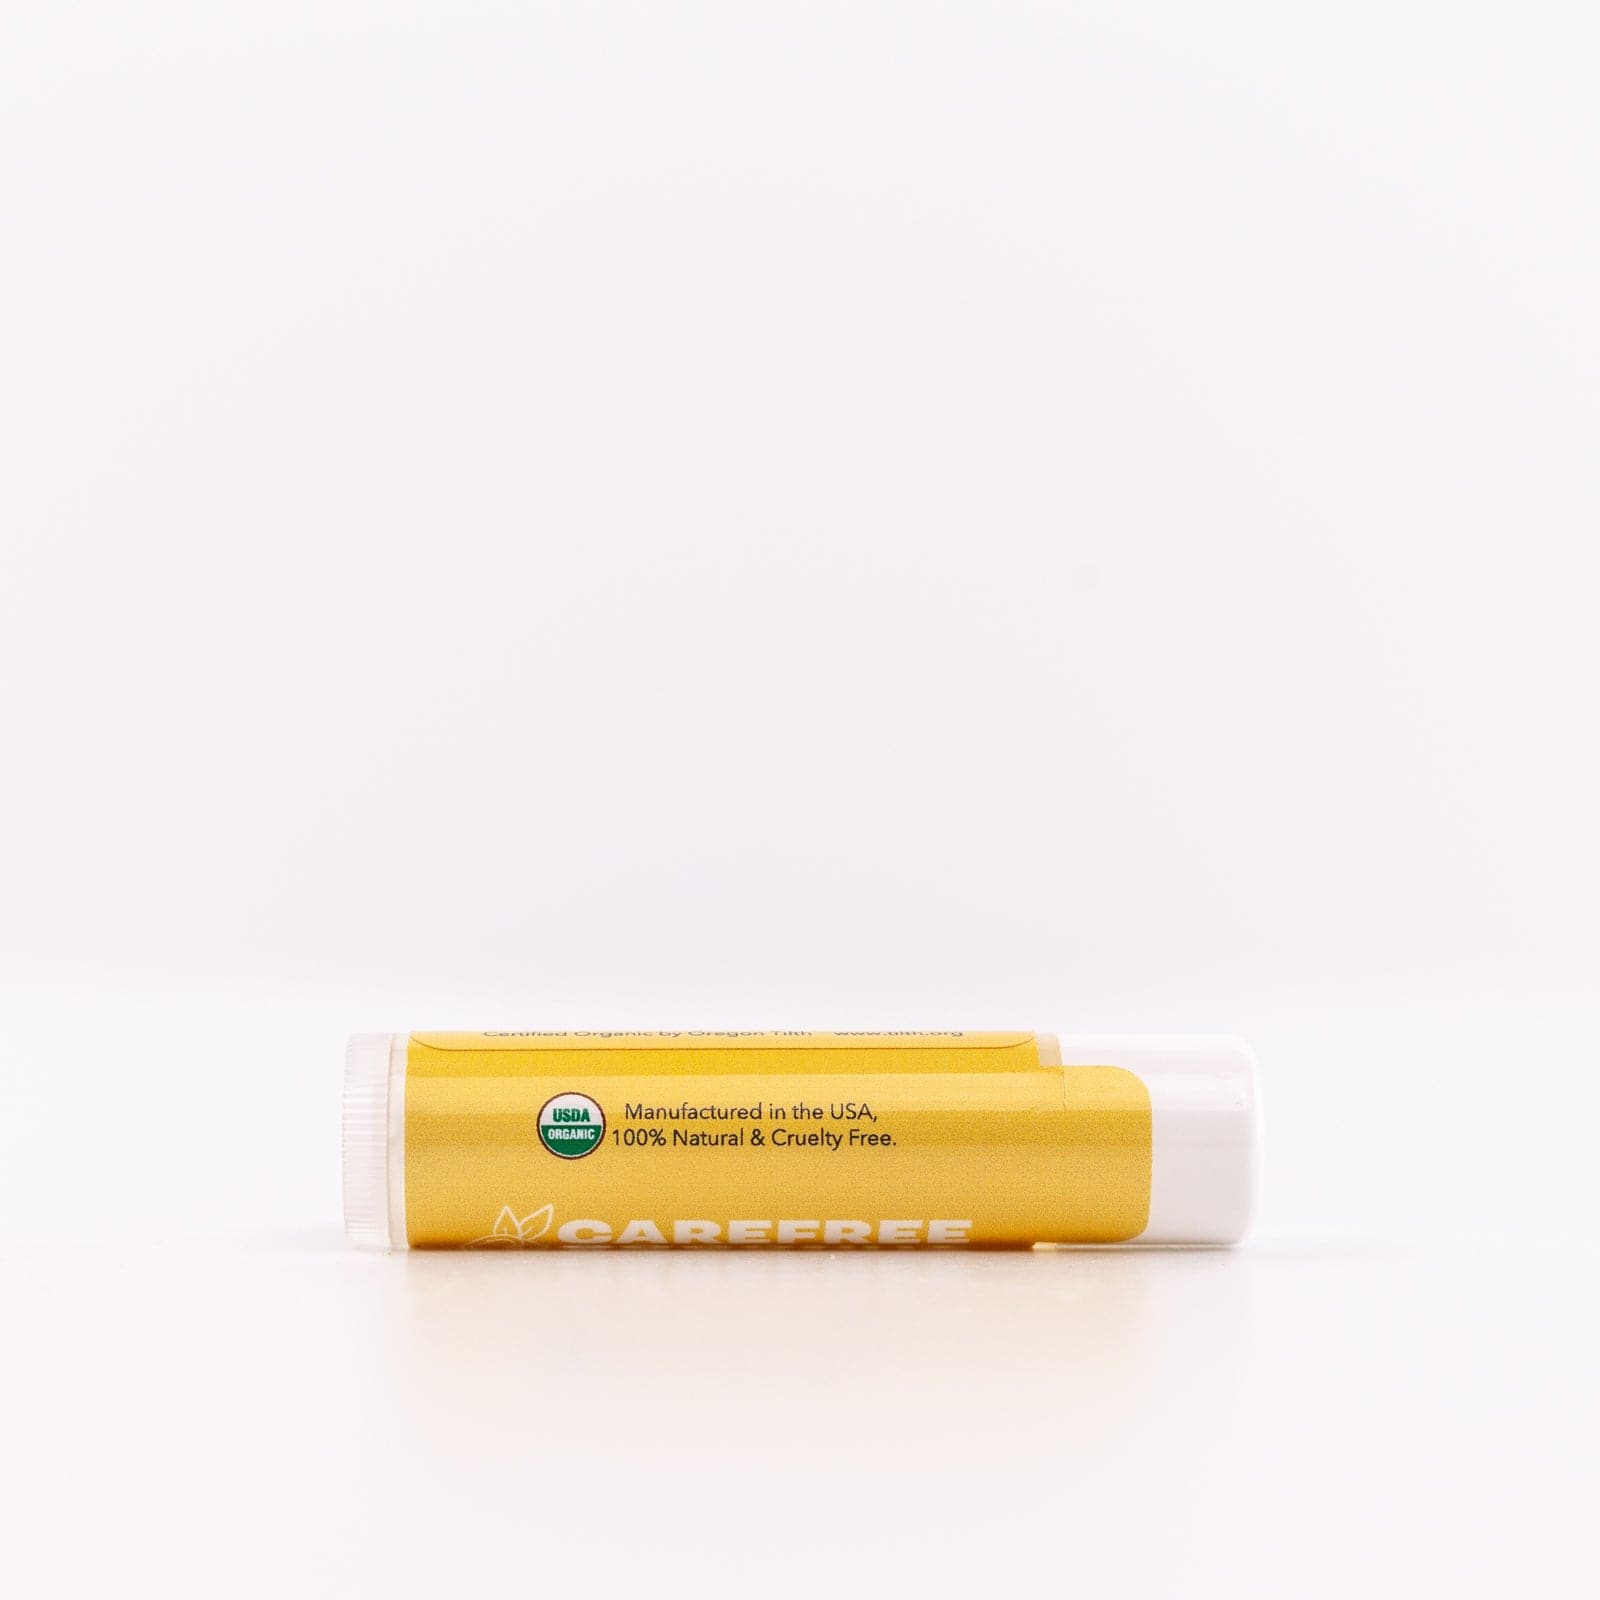 Yellow Lip Balm container tube against white background 